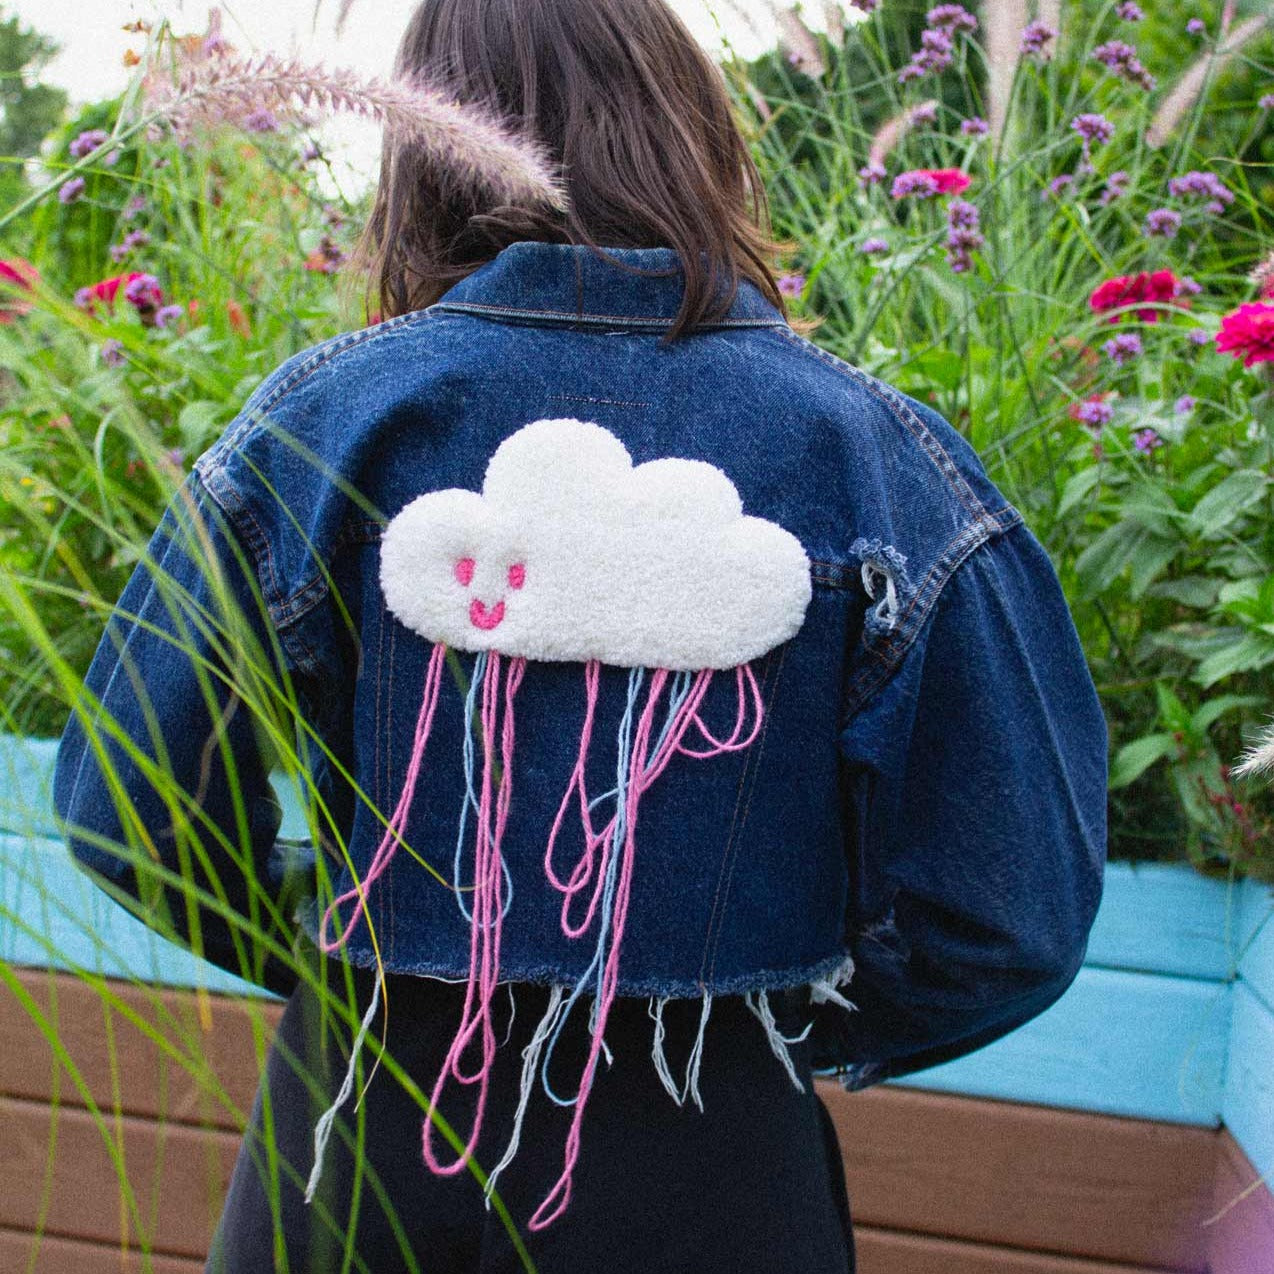 Upcycled jean jacket with cloud rug behind